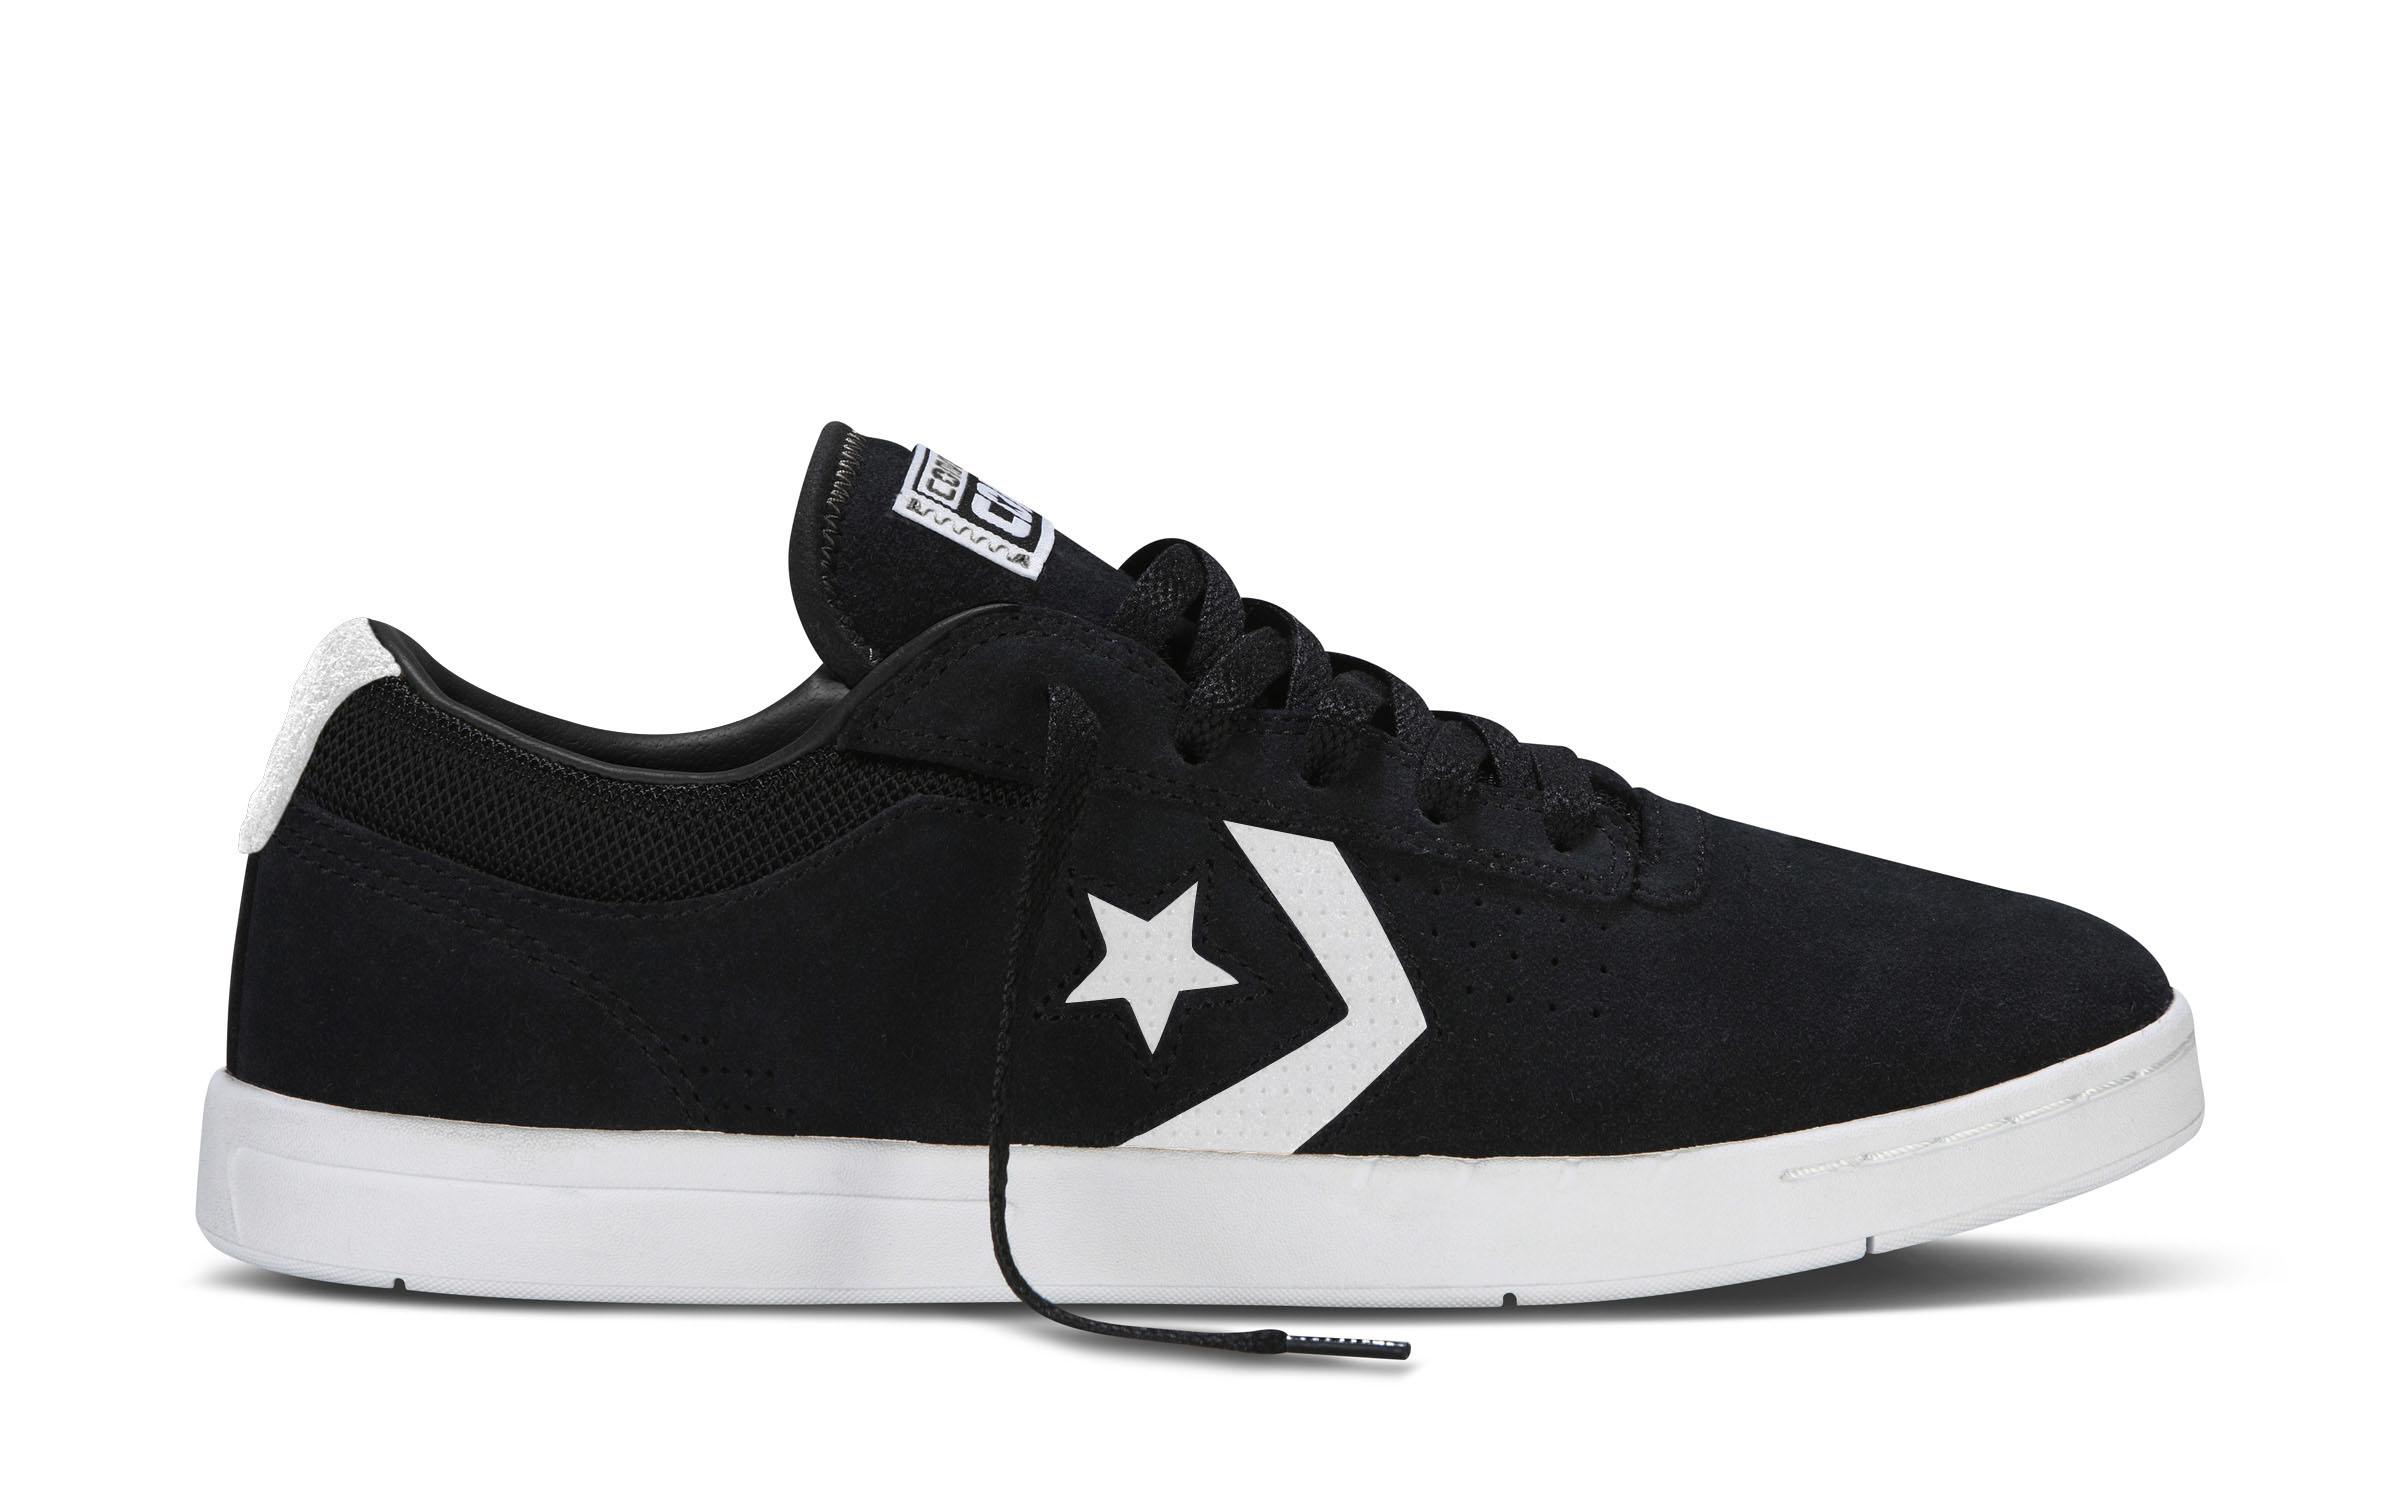 Converse Cons: Born for the Streets—Tough with Stylish Looks